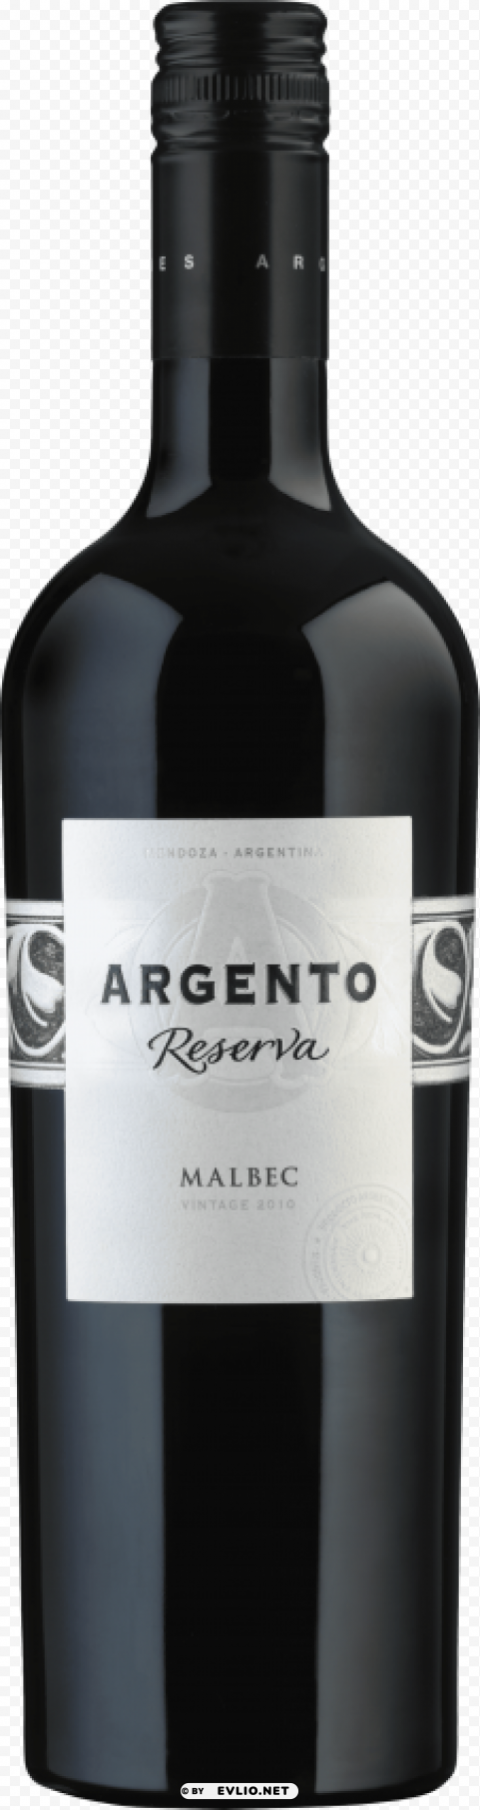 argento wine bottle PNG Image with Isolated Element